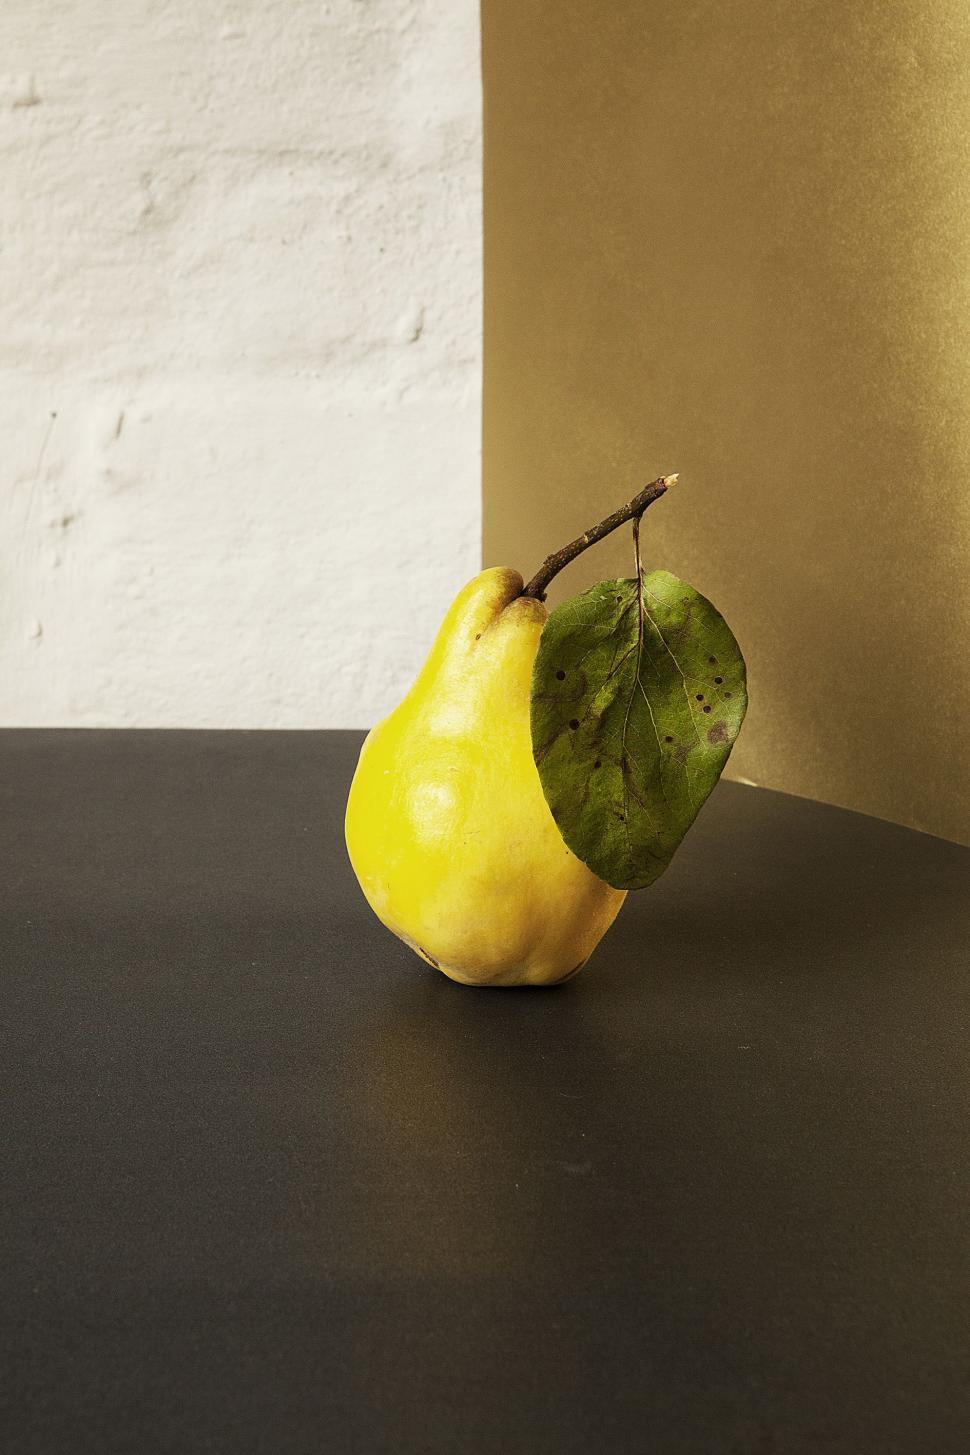 Free Image of Yellow Pear on Black Table 